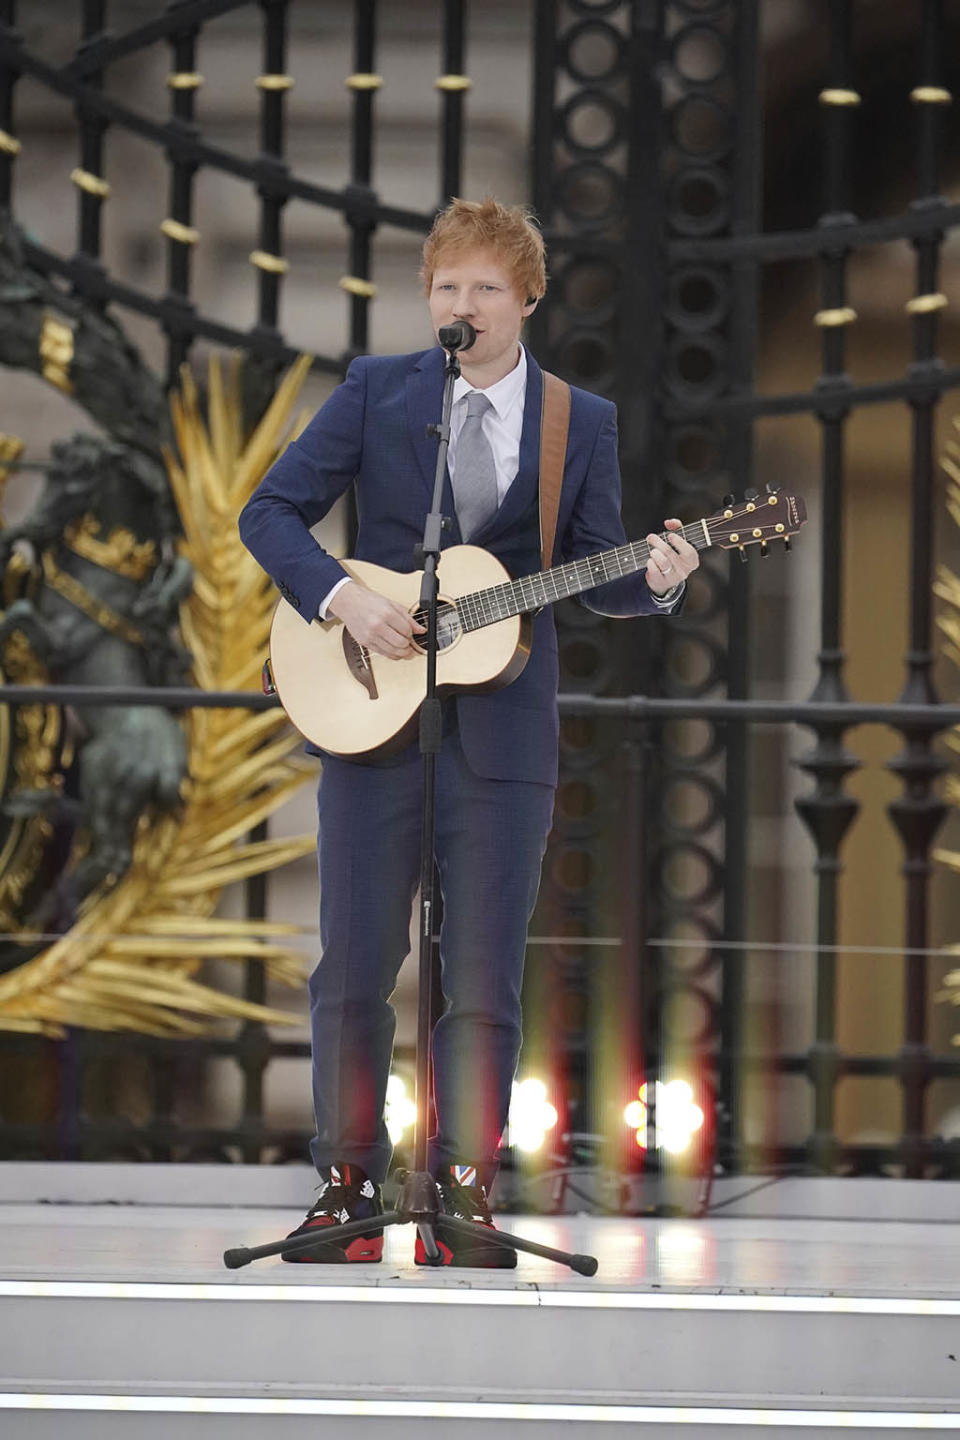 Ed Sheeran performs during the Platinum Jubilee Pageant outside Buckingham Palace in London on June 5, 2022. - Credit: AP